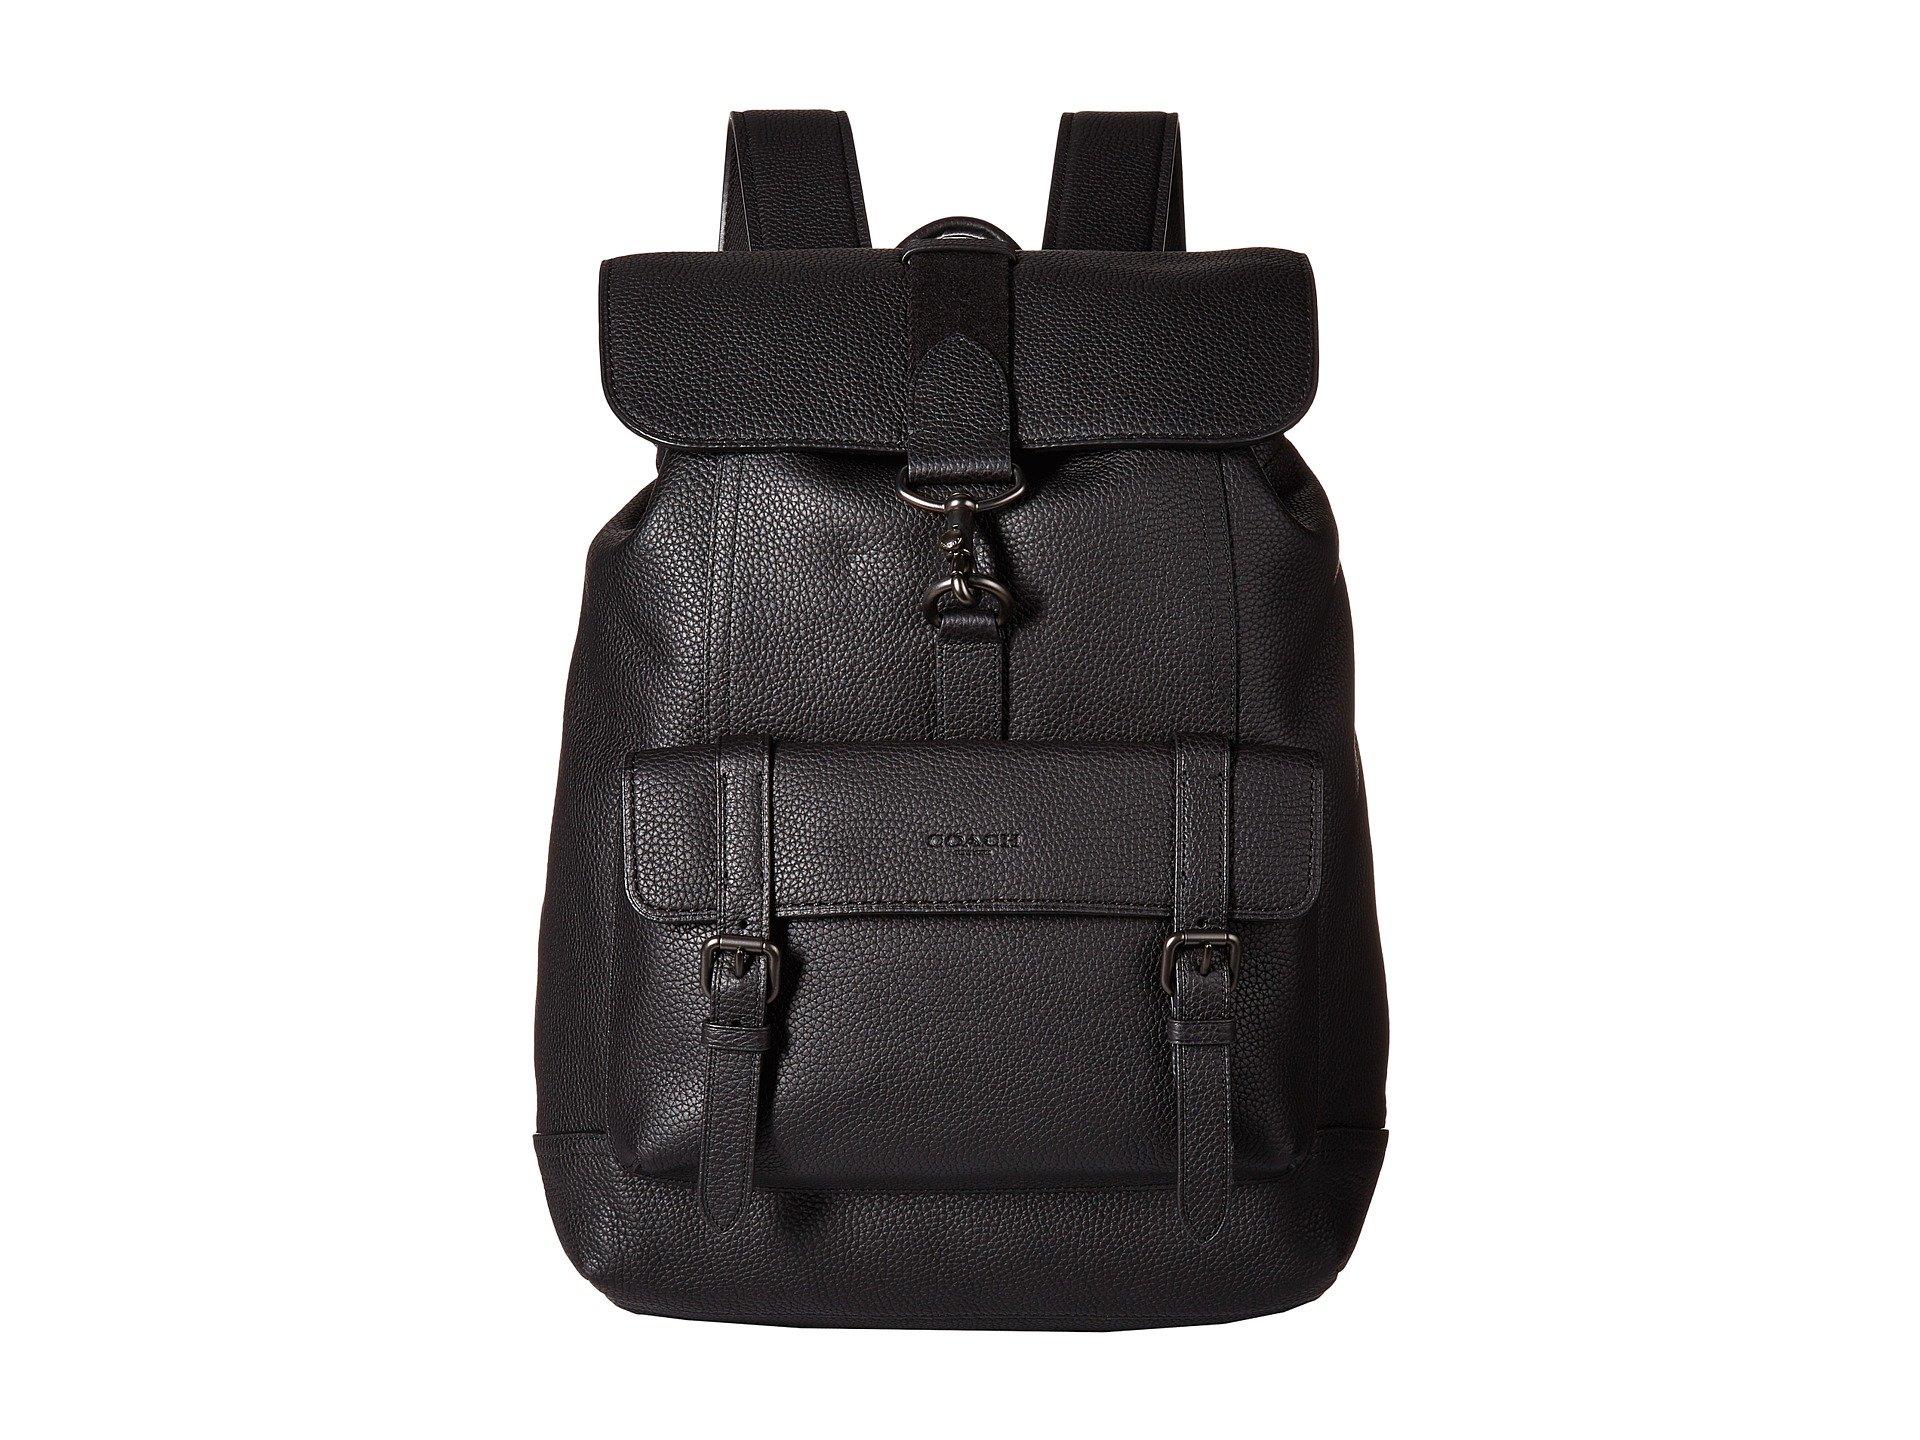 COACH Bleecker Backpack In Pebbled Leather in Black for Men - Lyst